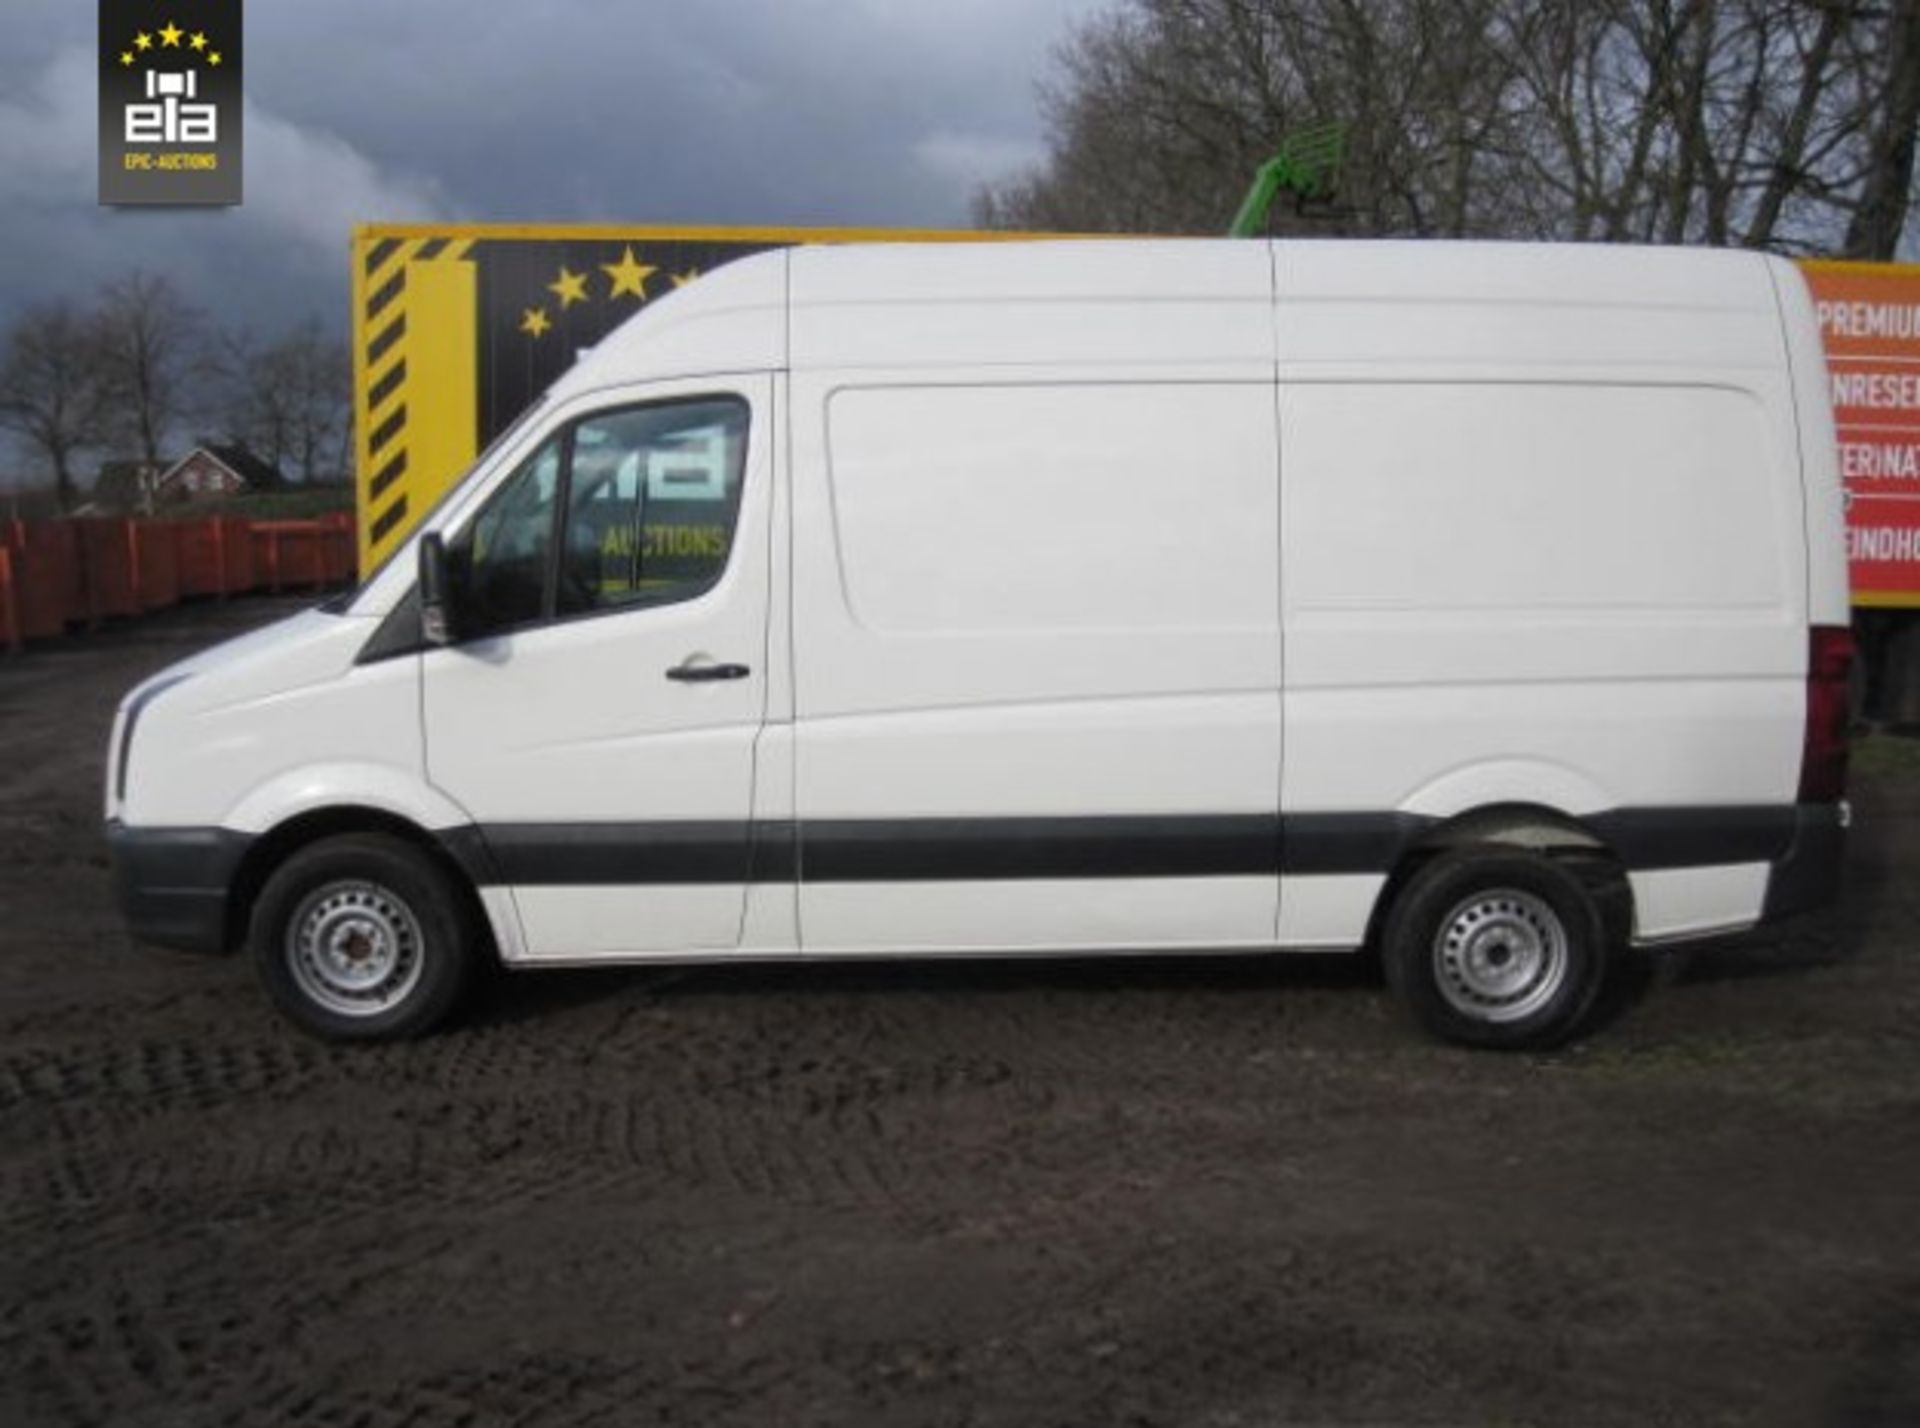 2011 Volkswagen Crafter 2.5 TDI L2H2 20151051 - Image 2 of 26